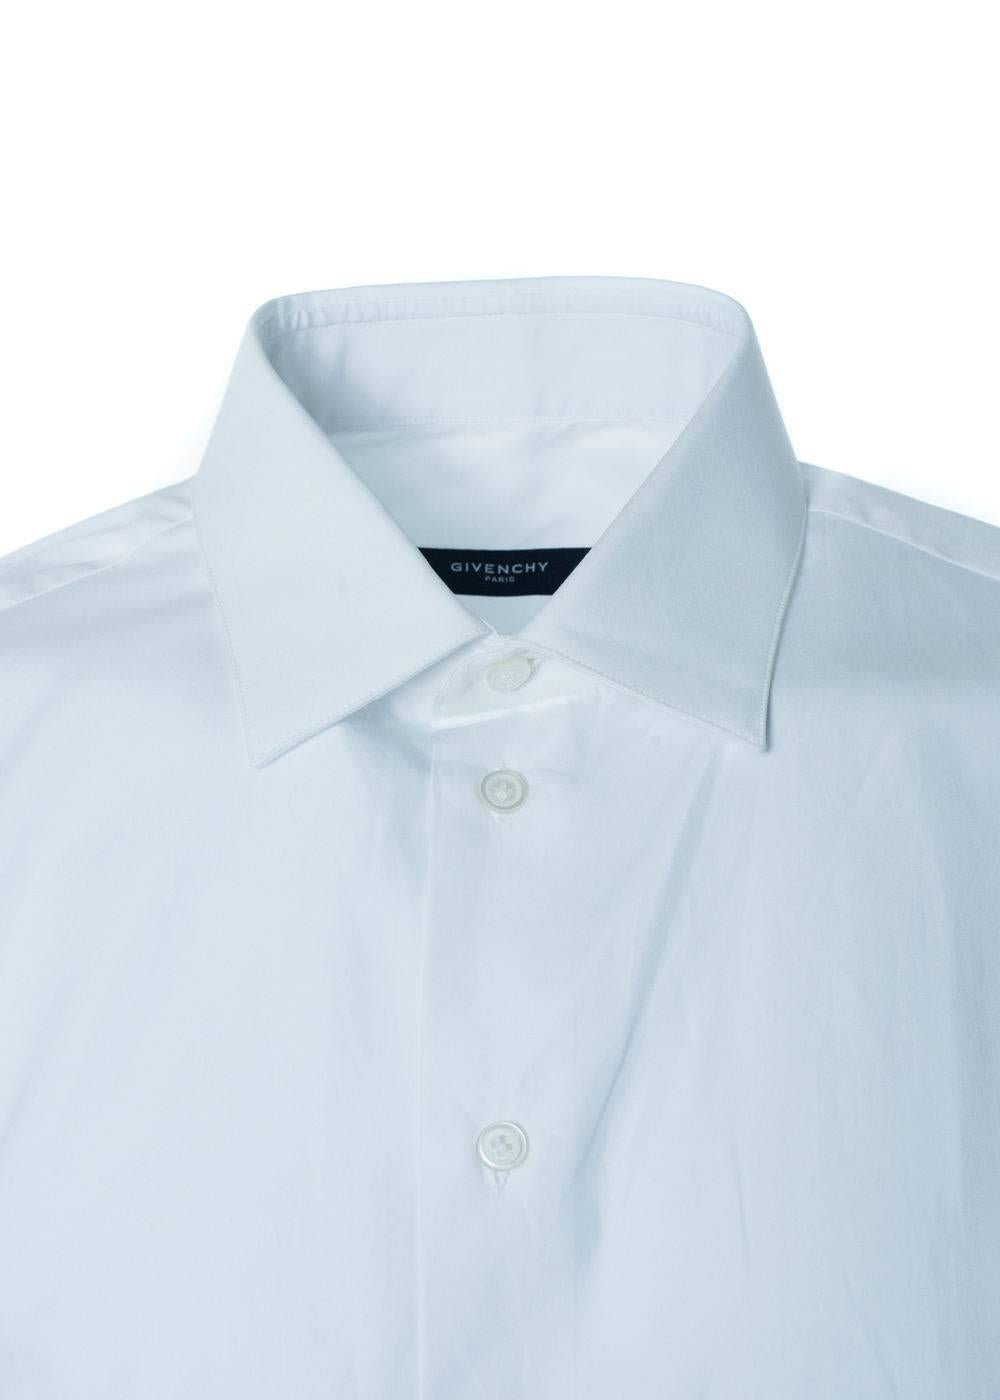 Brand New Givenchy Men's Button Down 
Original Tags
Retails in Stores & Online for $350
Men's Size E42 (XS) Fits True to Size

Every man needs a classic white button down for those professional settings or dressy outings. This Givenchy button down